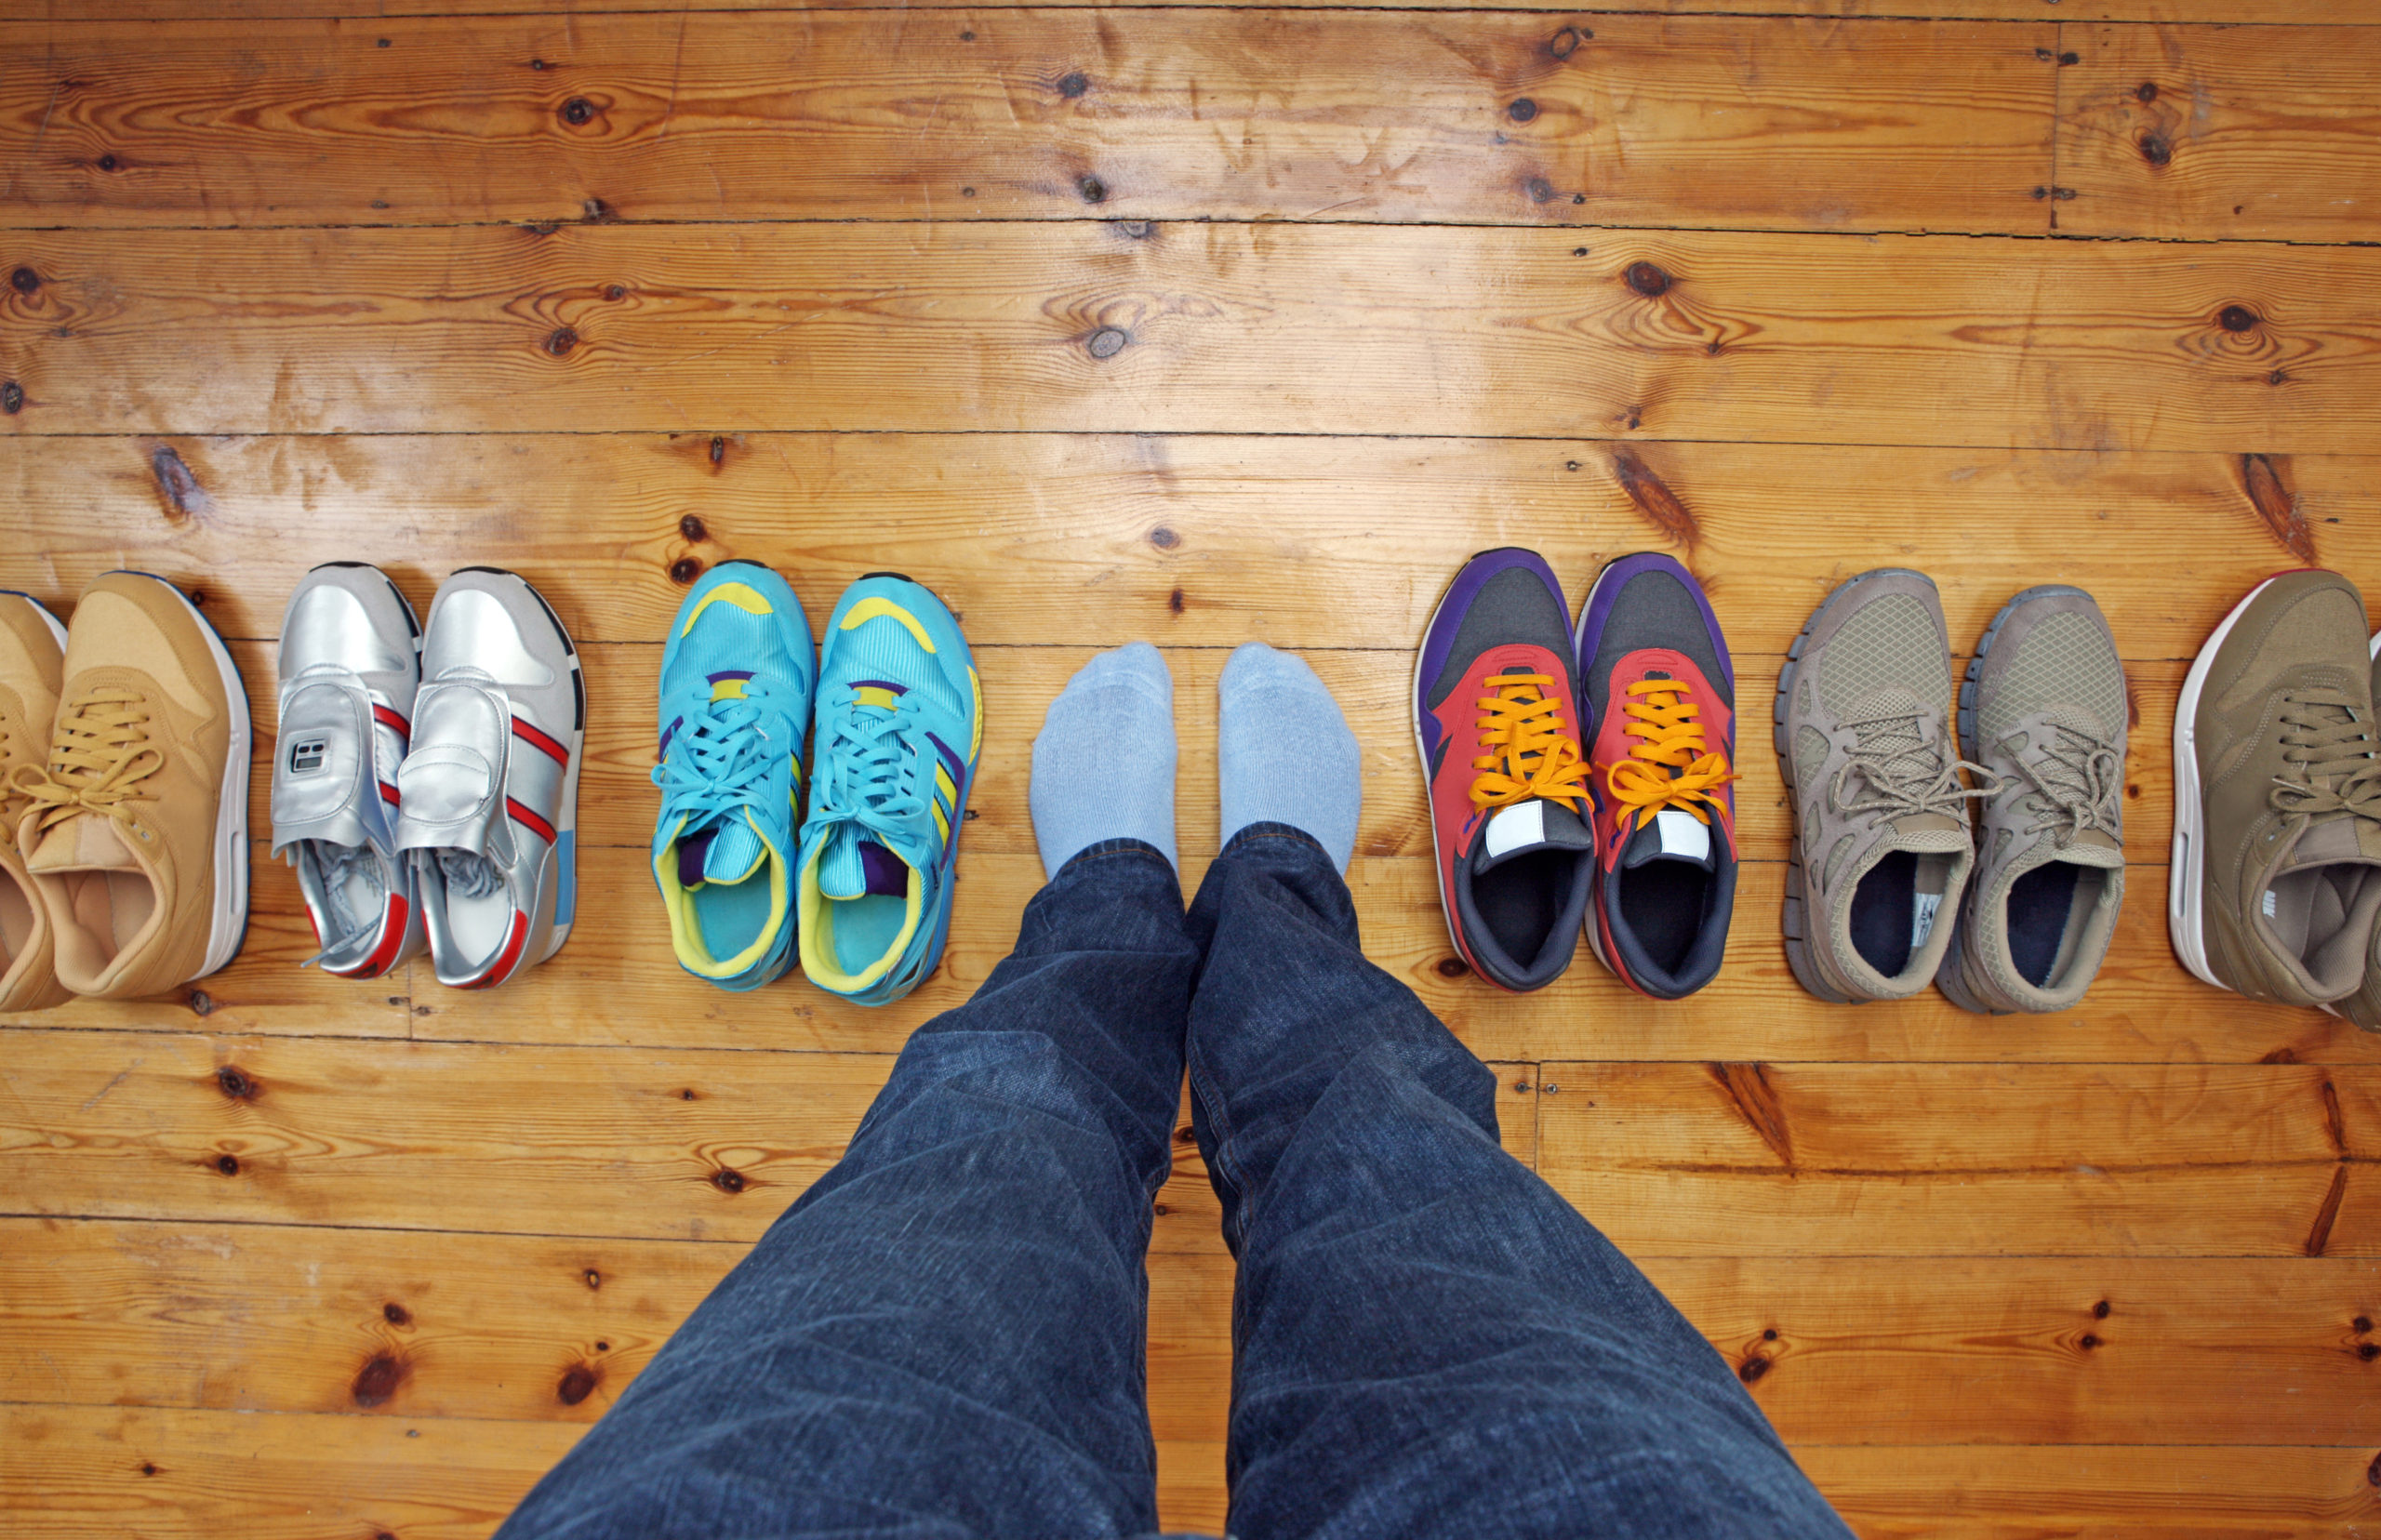 Deciding on what footwear to put on from choice of trainers.